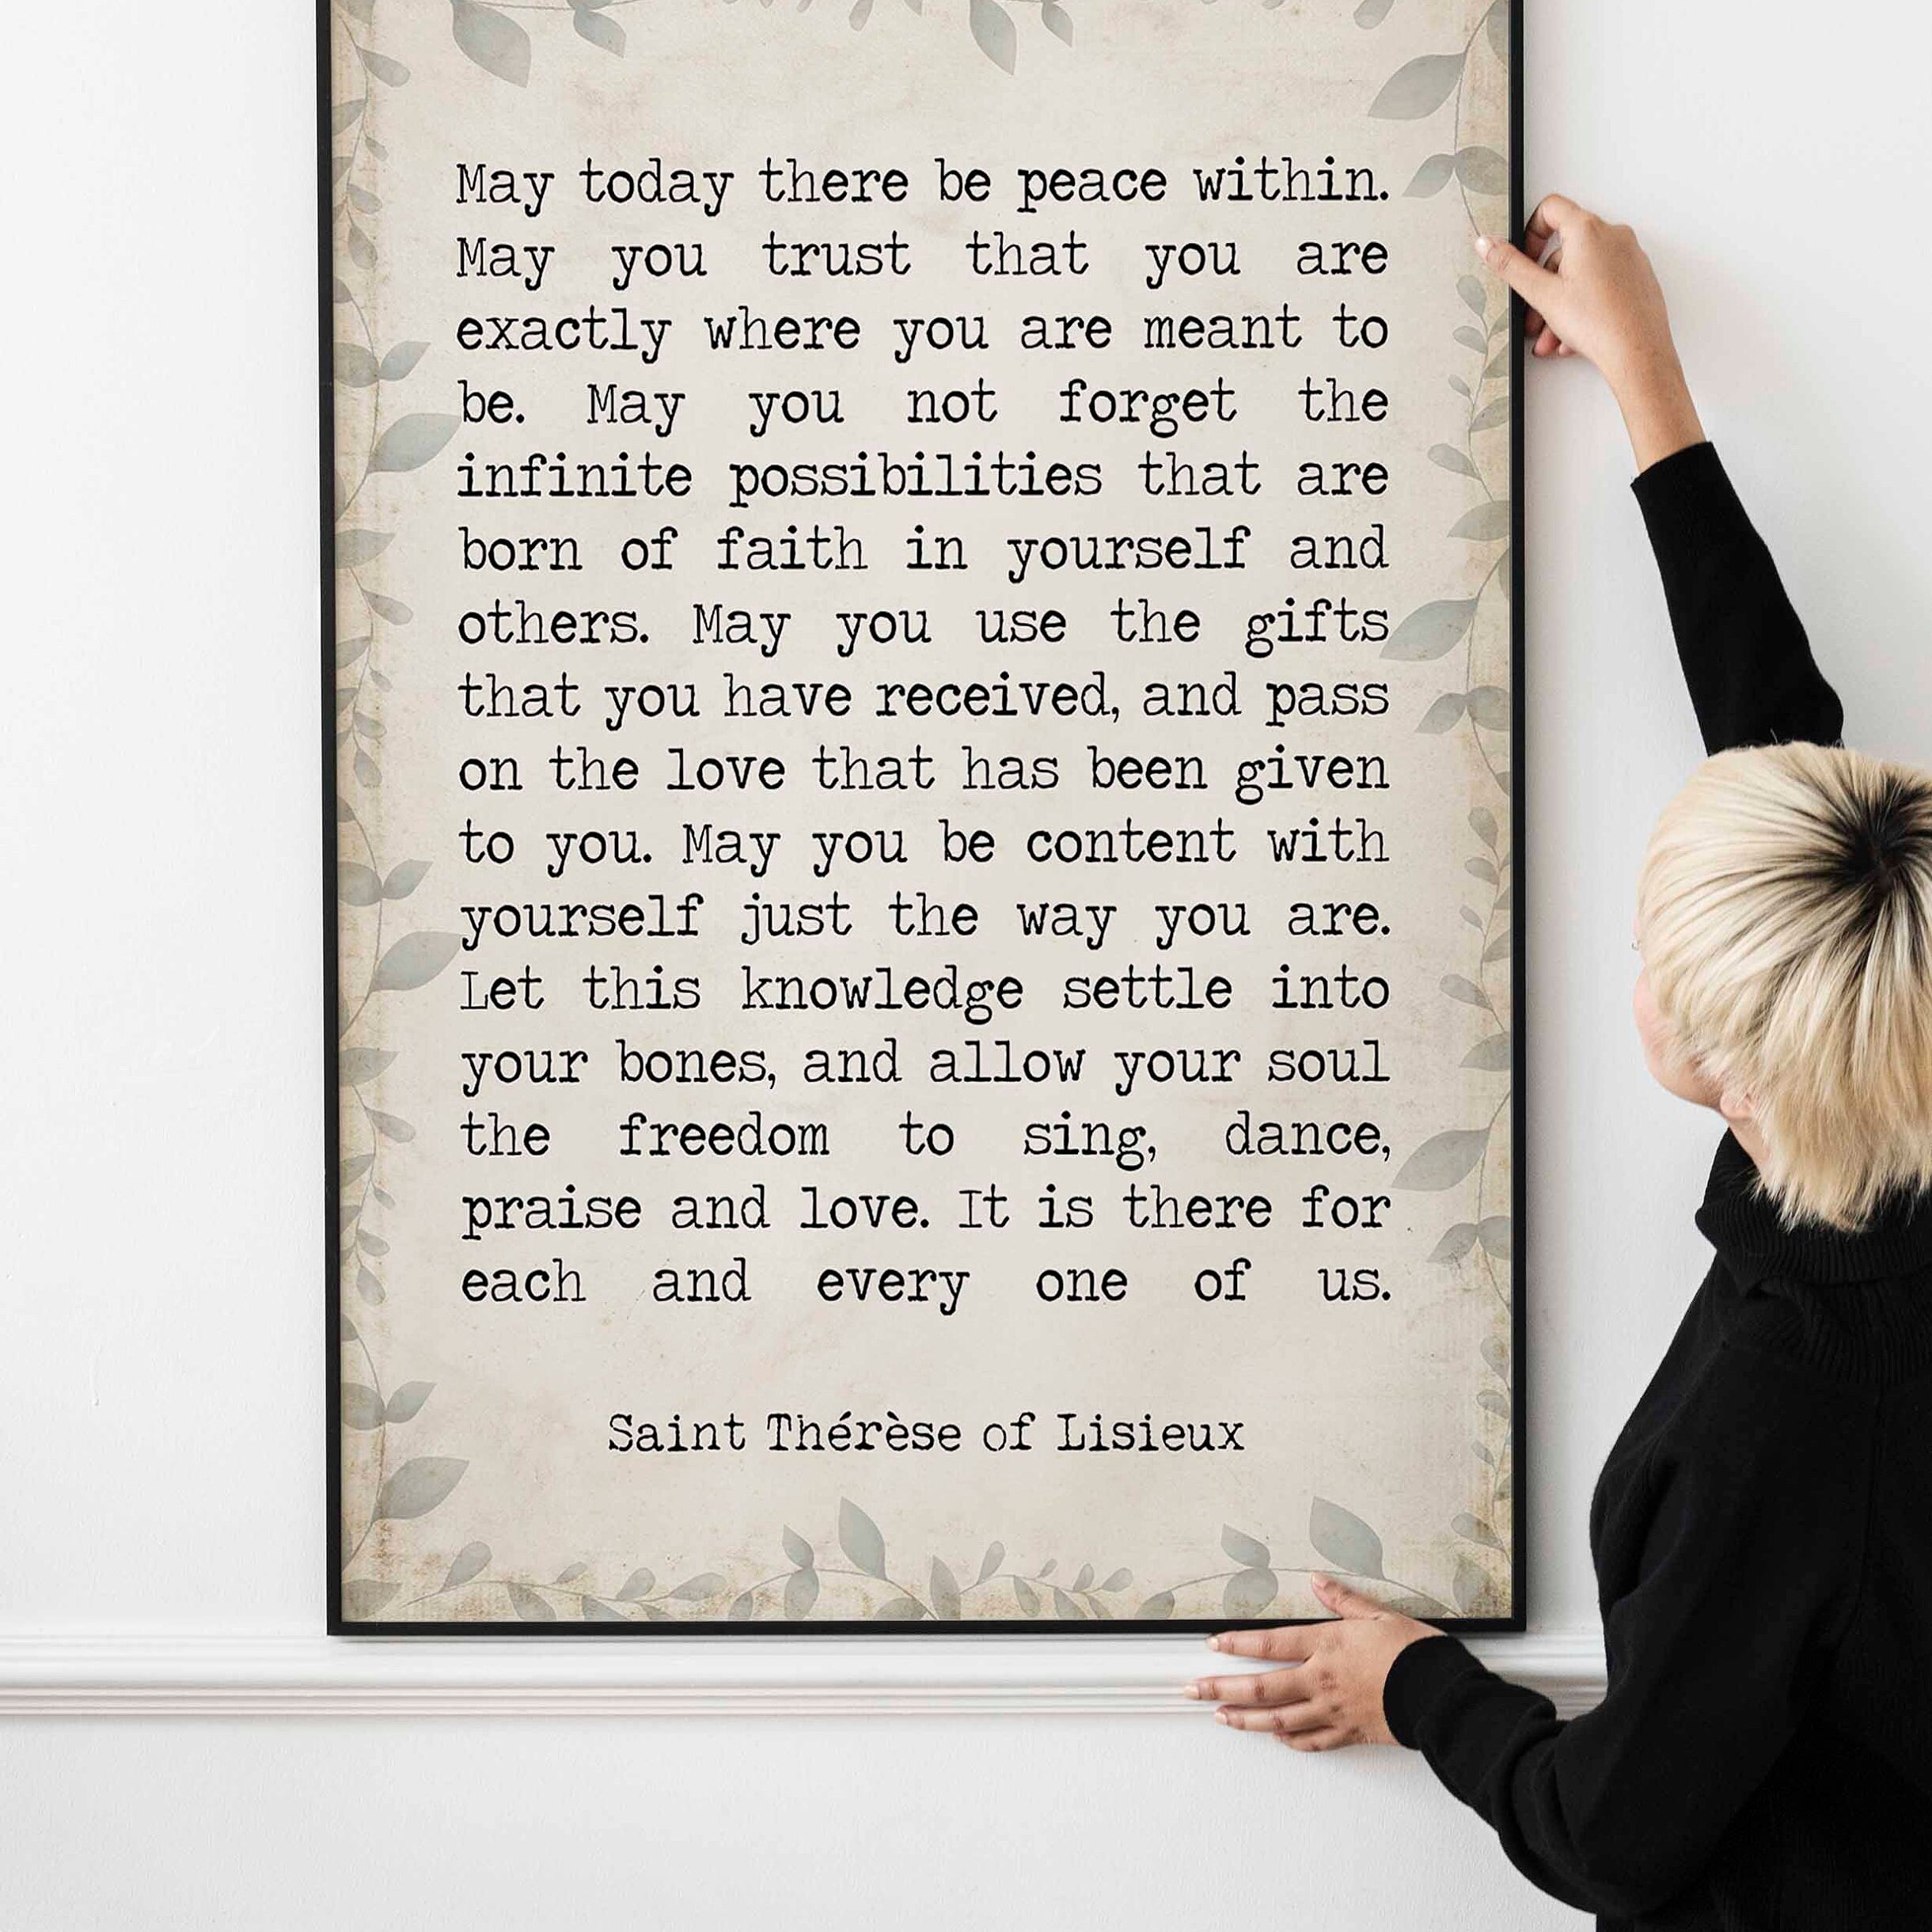 St Therese of Lisieux Peace Quote Print, May Today There Be Peace Within Inspirational Quote Wall Art Print